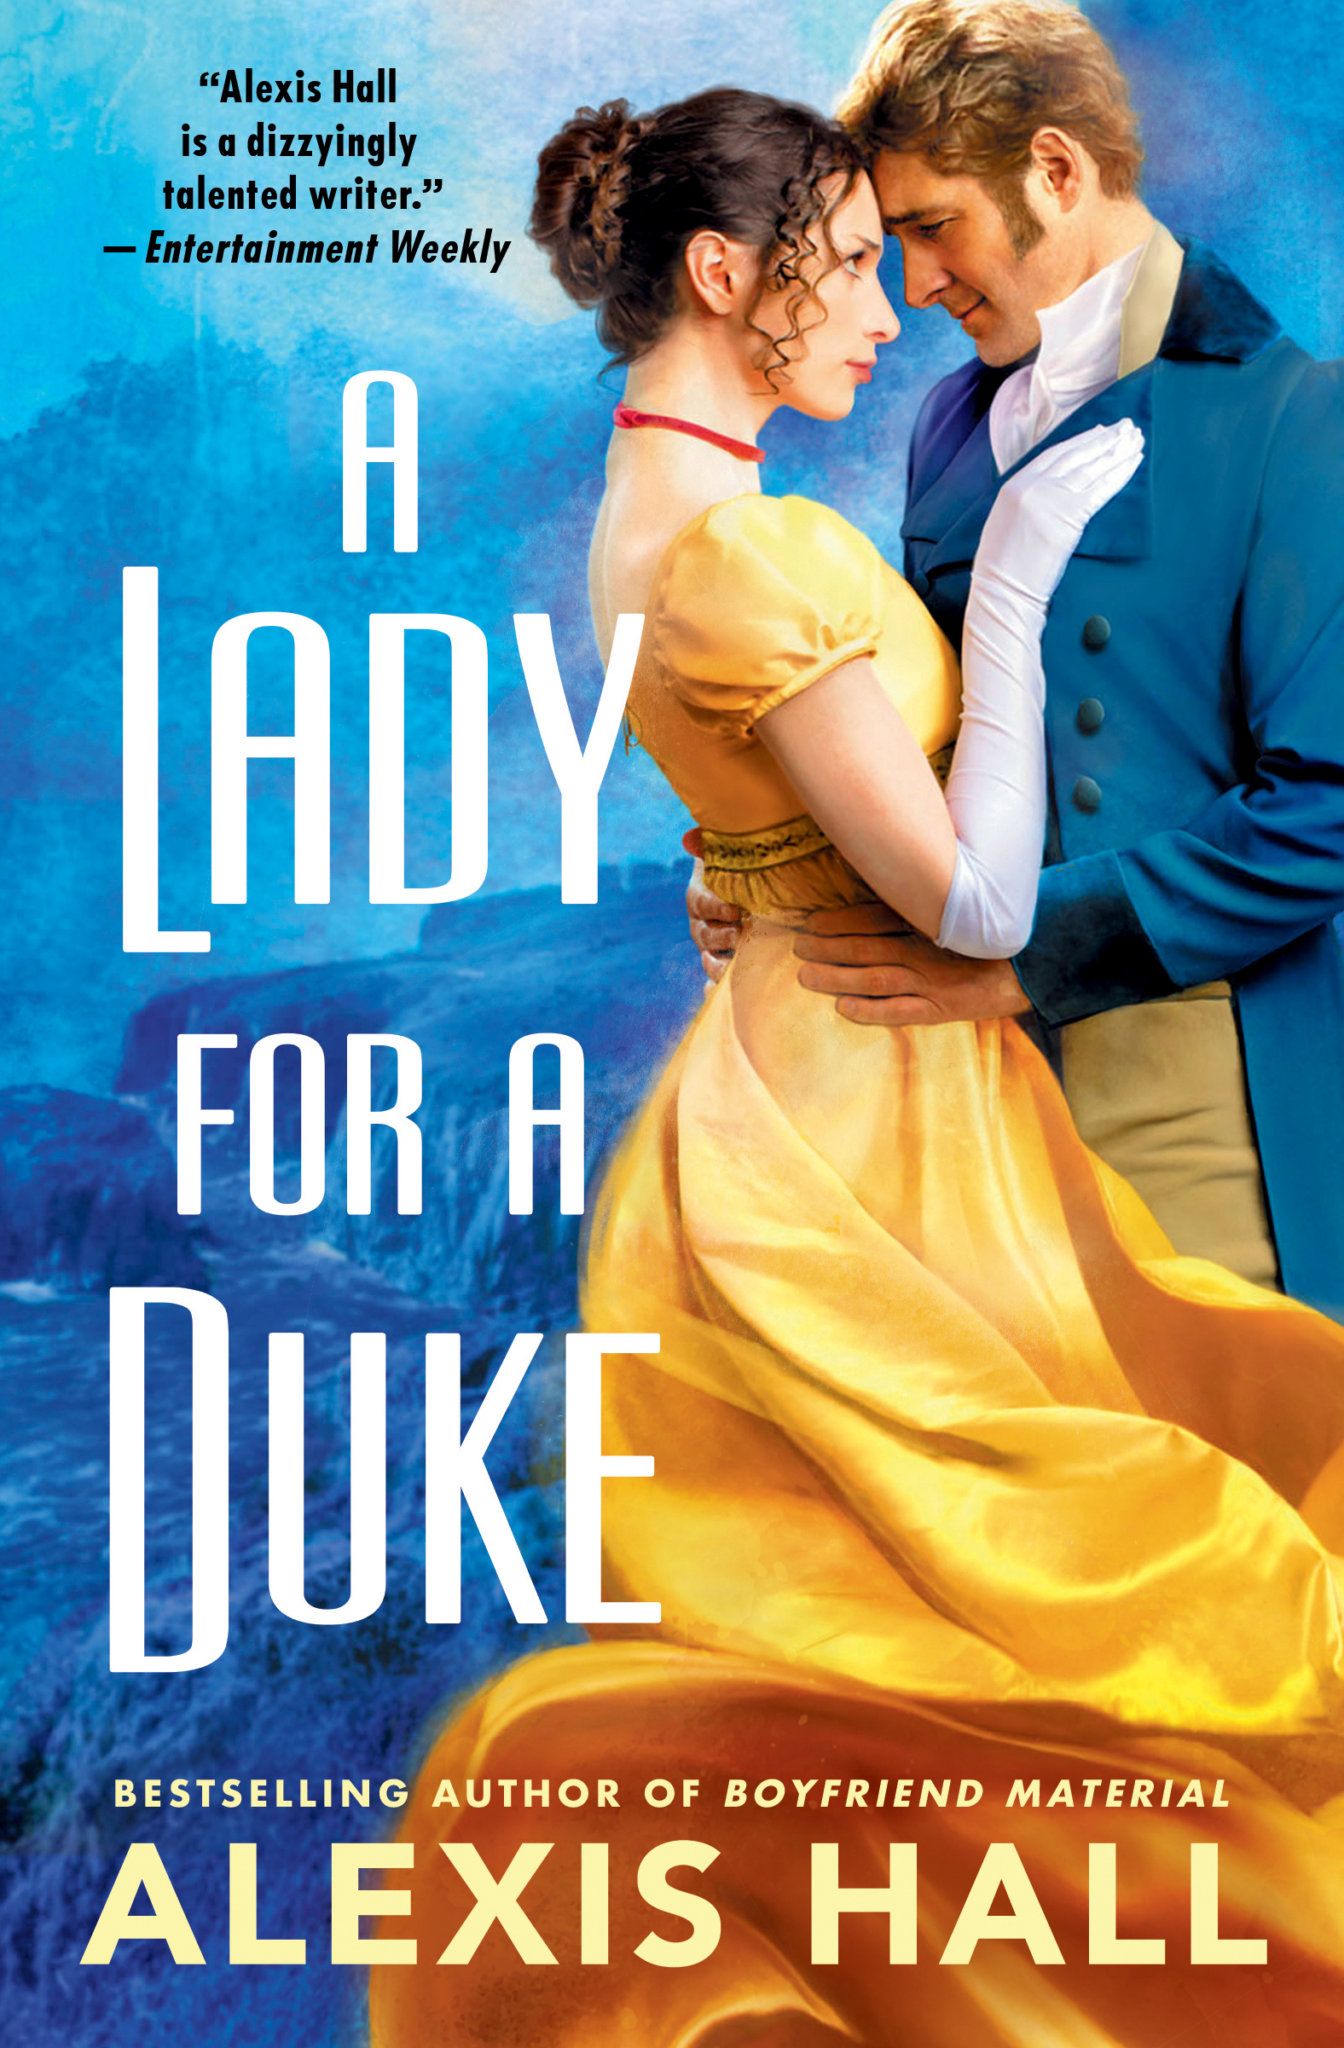 "A Lady for a Duke by Alexis Hall, bestselling author of Boyfriend Material; 'Alexis Hall is a dizzyingly talented writer.' –Entertainment Weekly" — Image shows a woman and man in period garb embracing